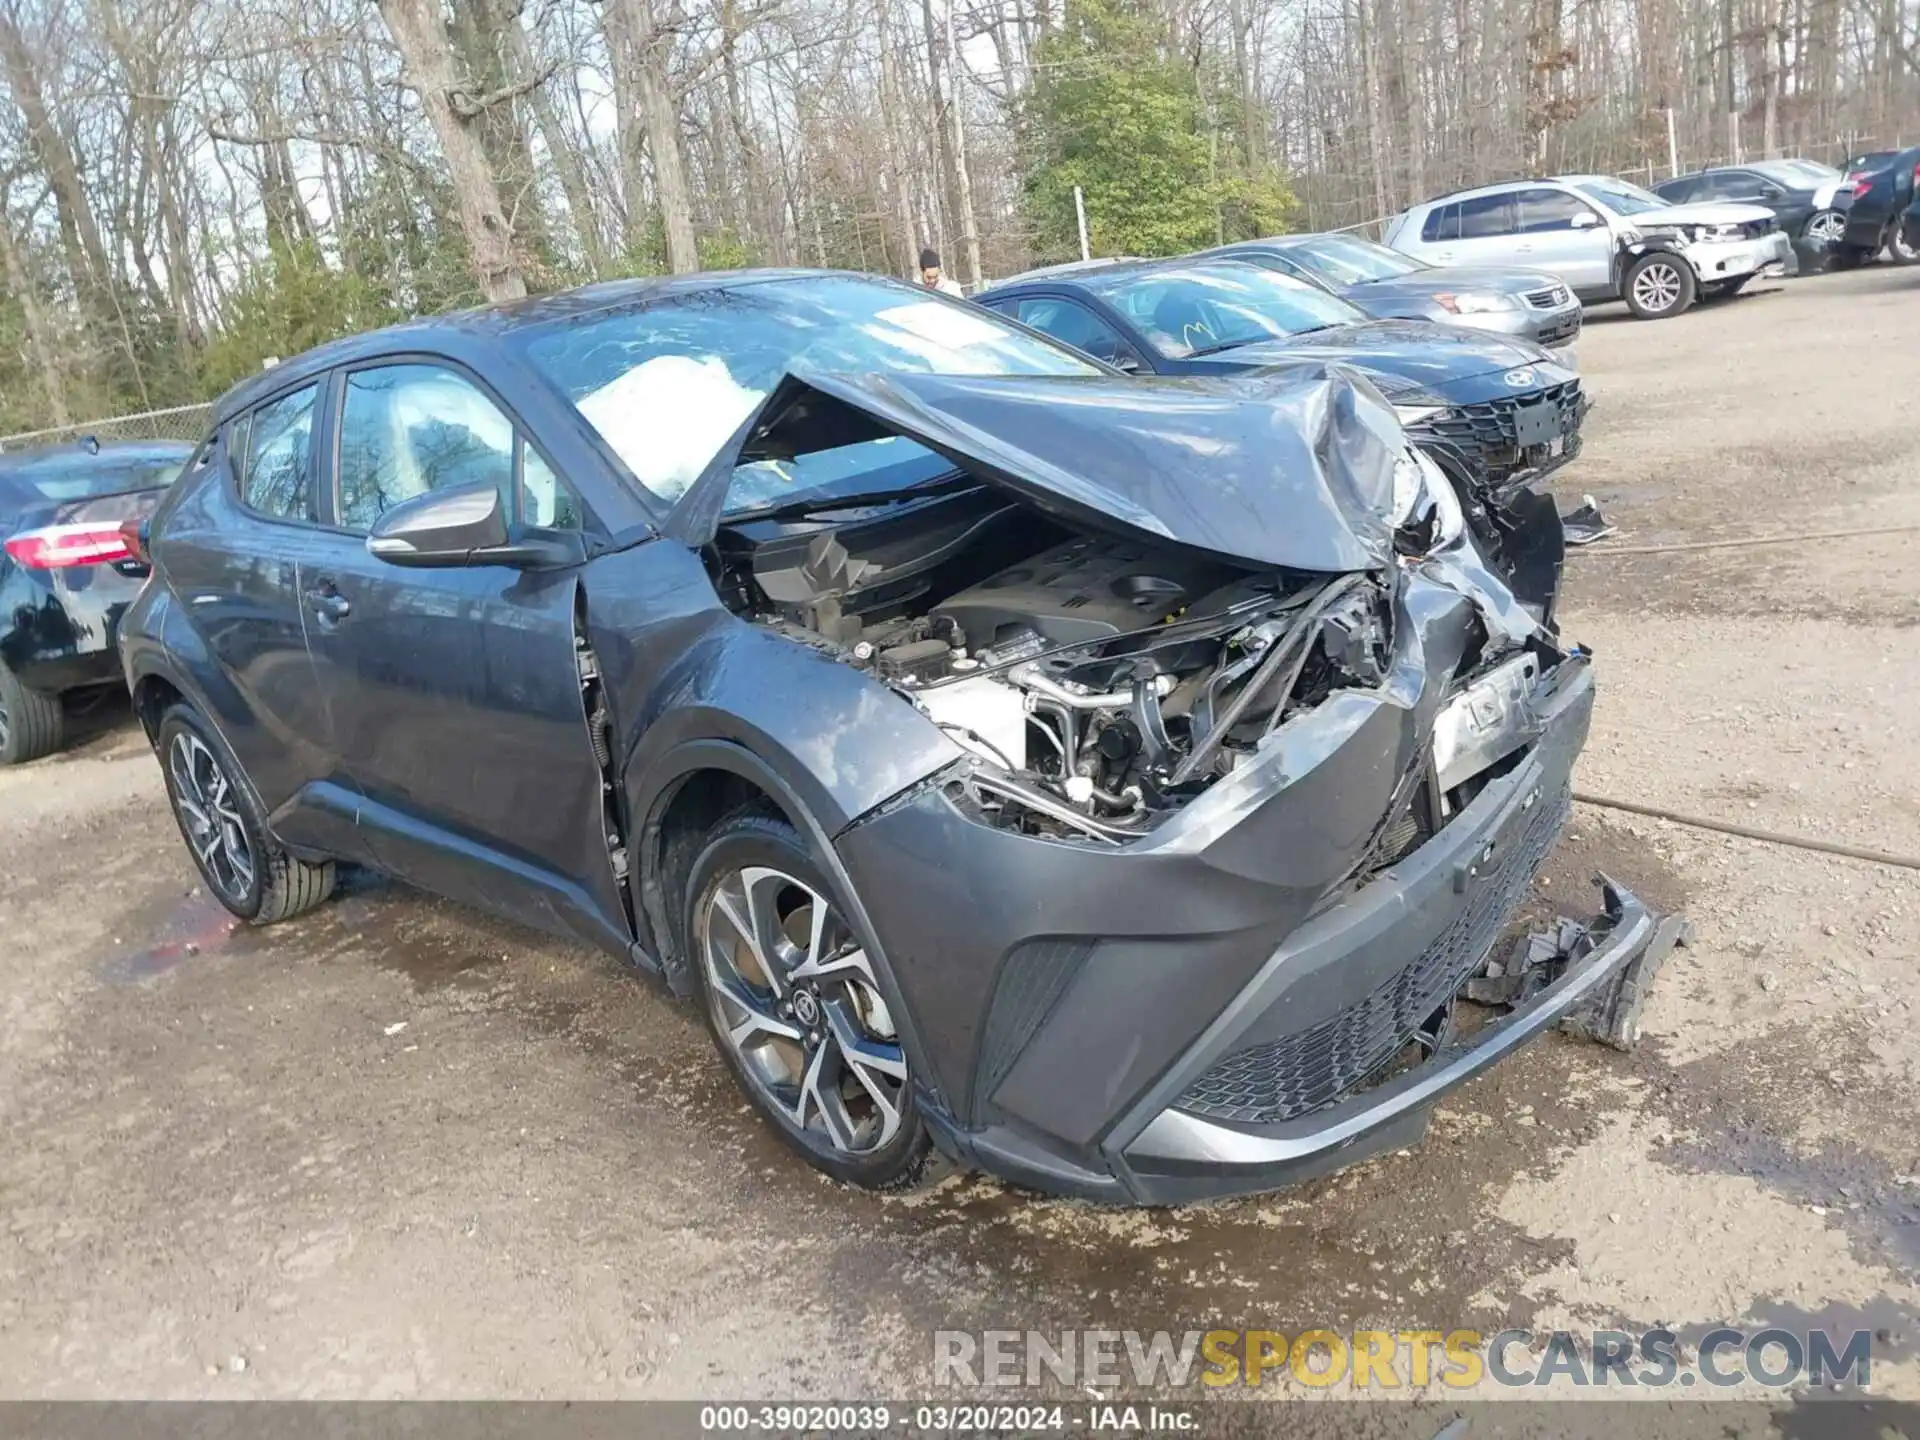 1 Photograph of a damaged car NMTKHMBXXNR145634 TOYOTA C-HR 2022